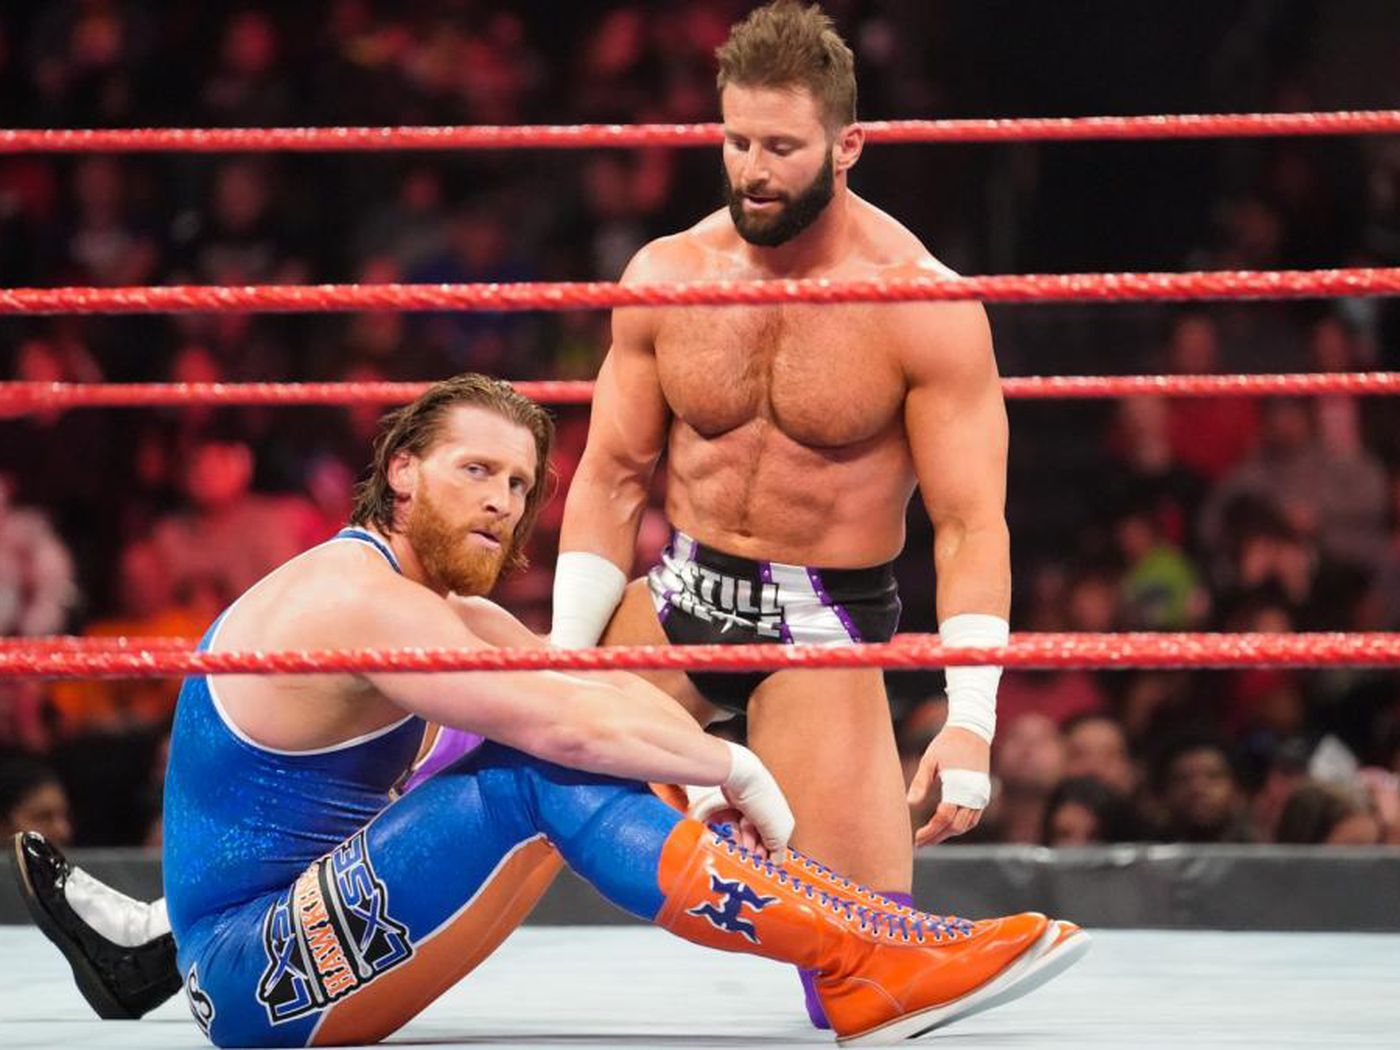 I Was Doing Whatever I Could- Zack Ryder Reveals How WWE Locker